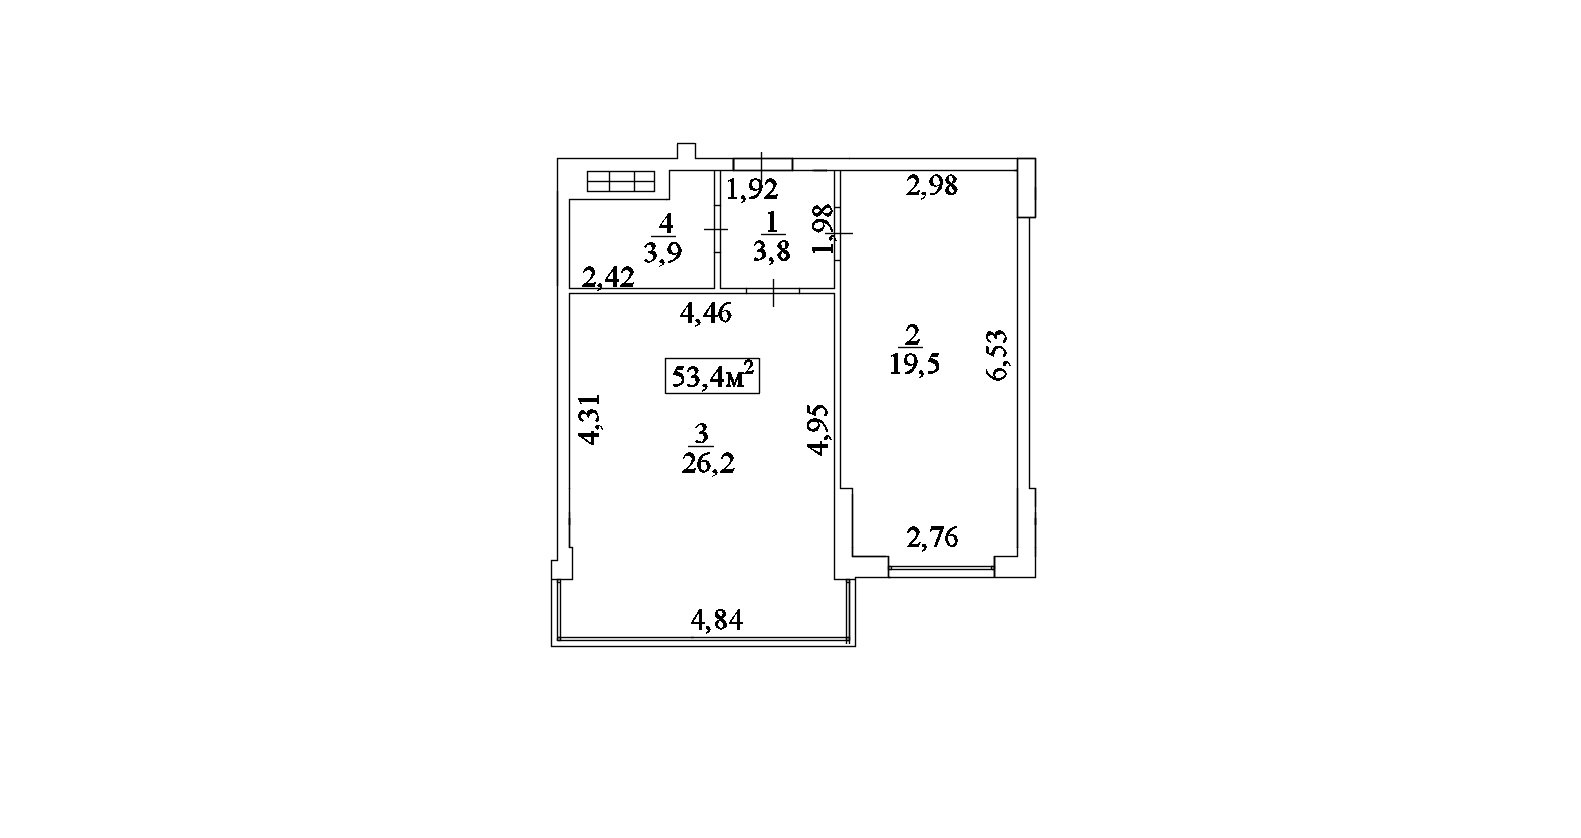 Planning 1-rm flats area 53.4m2, AB-10-04/00035.